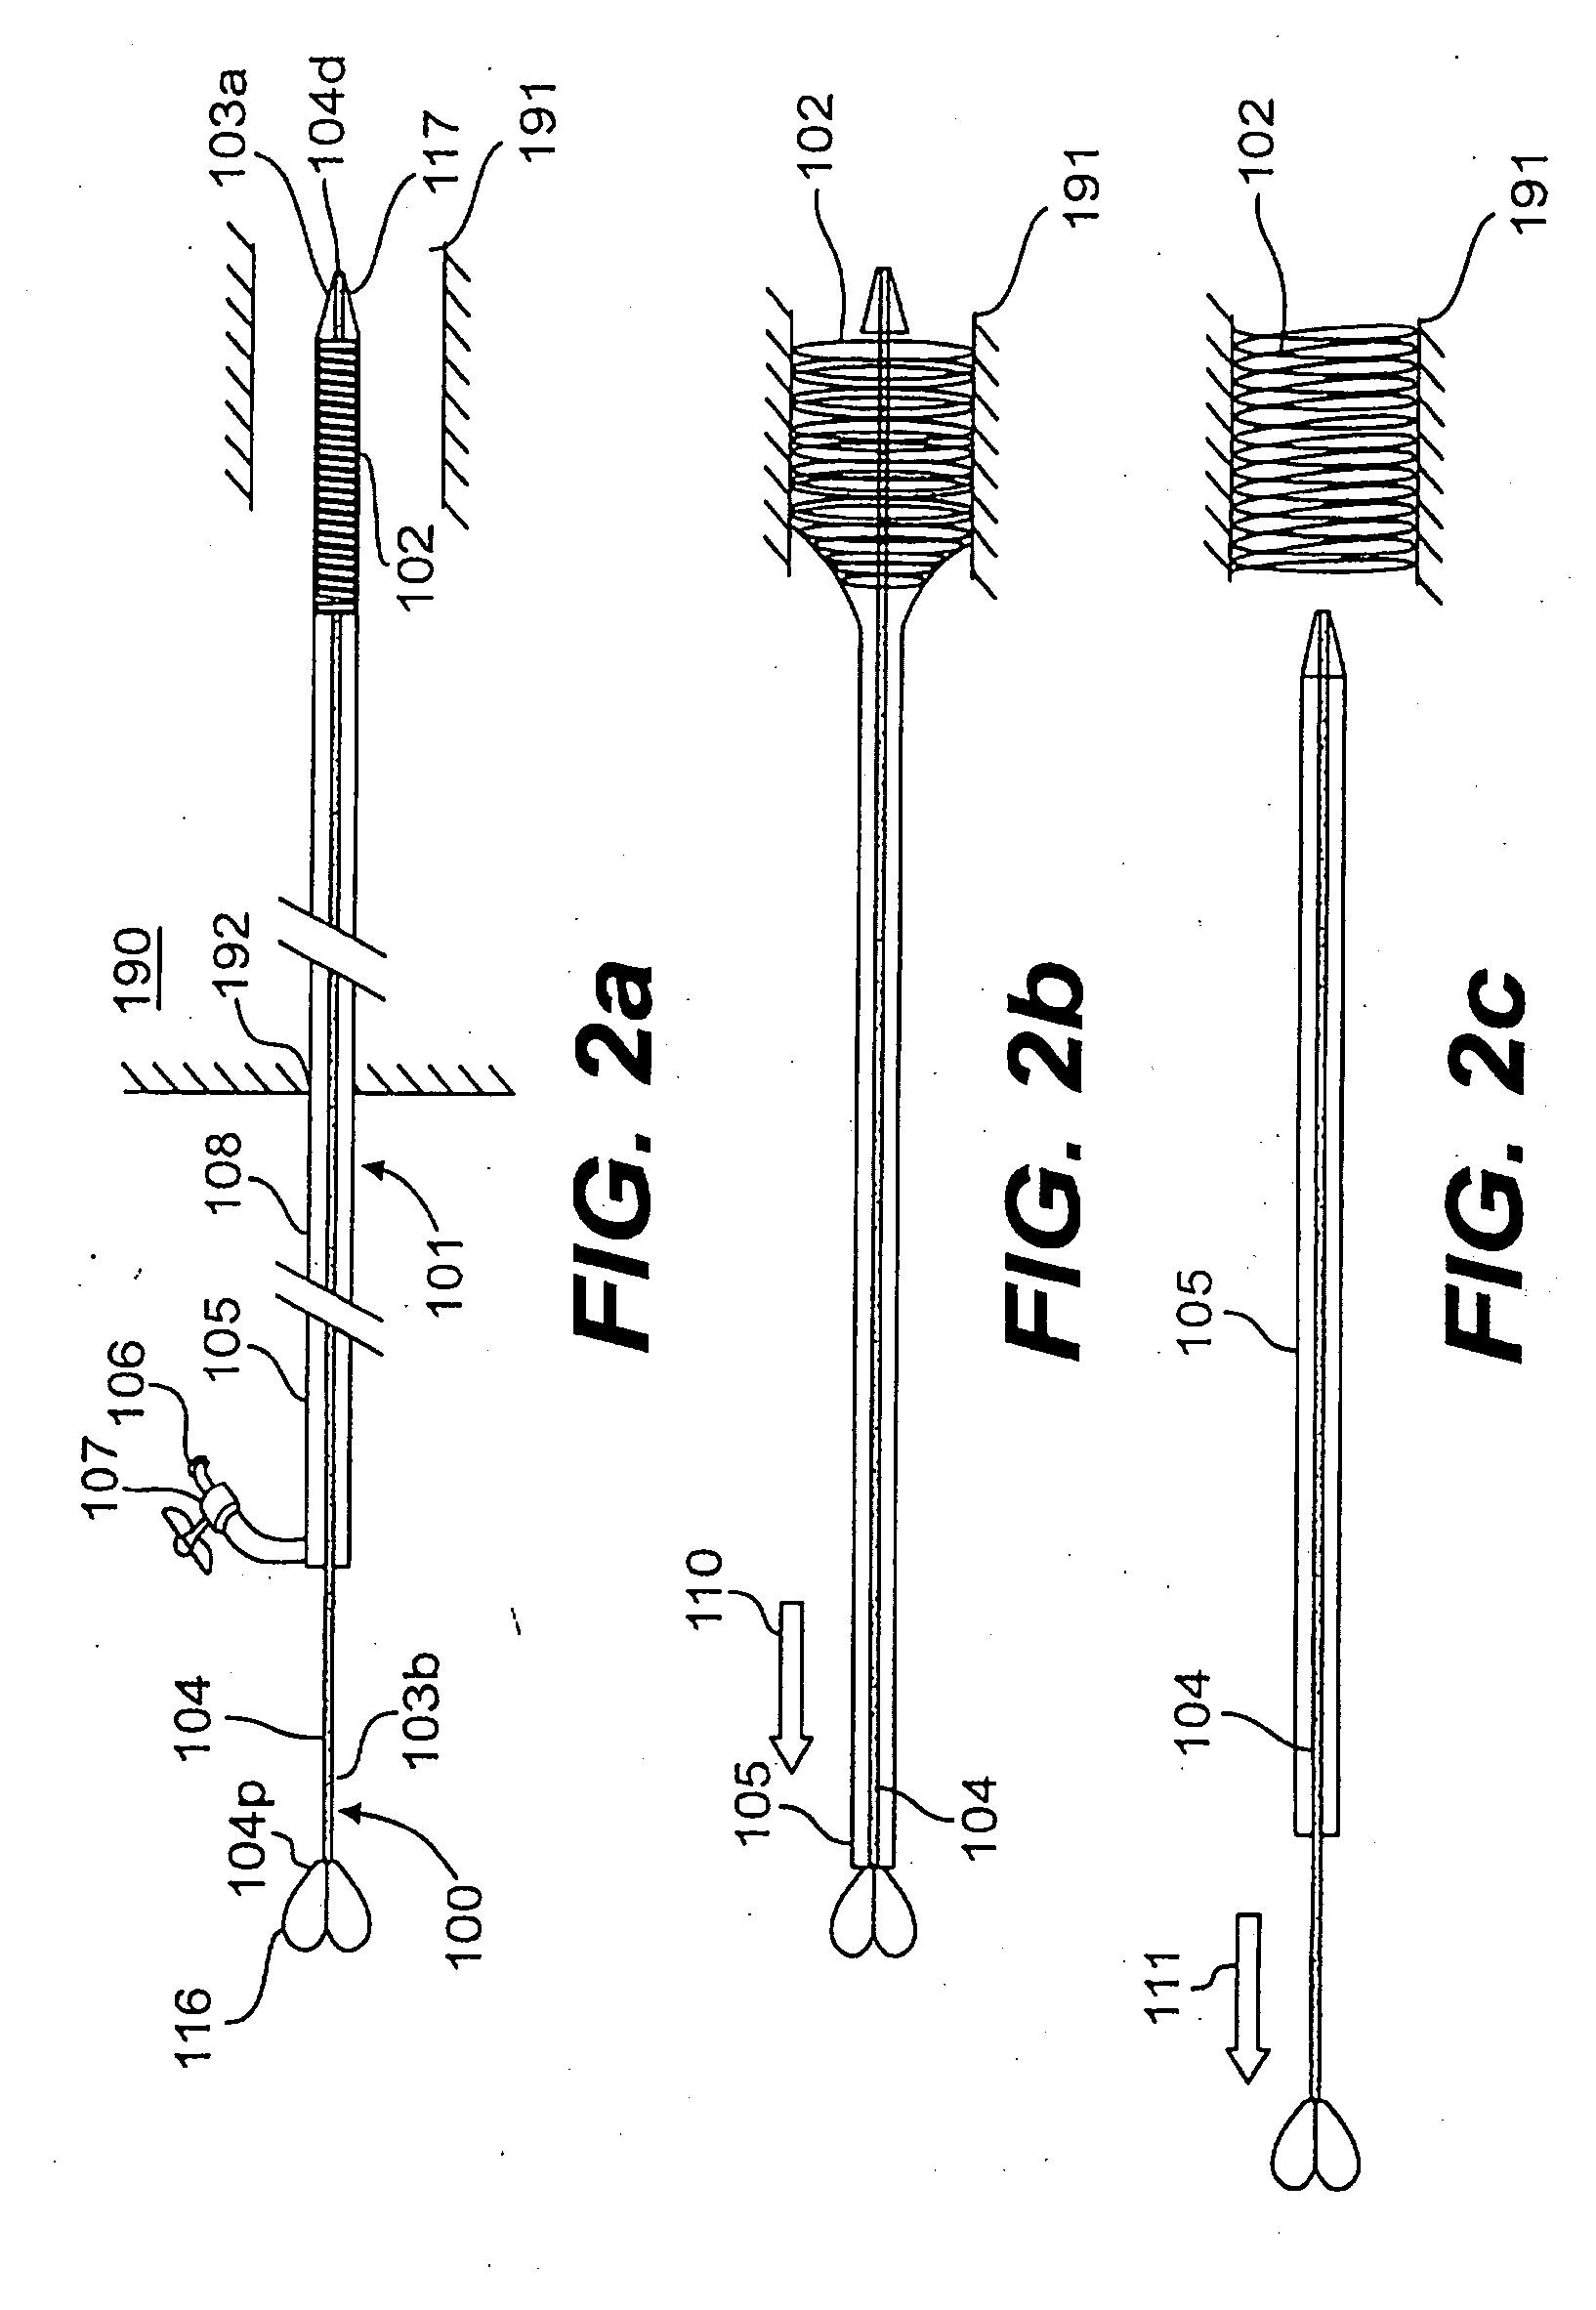 Endoscopic stent delivery system and method